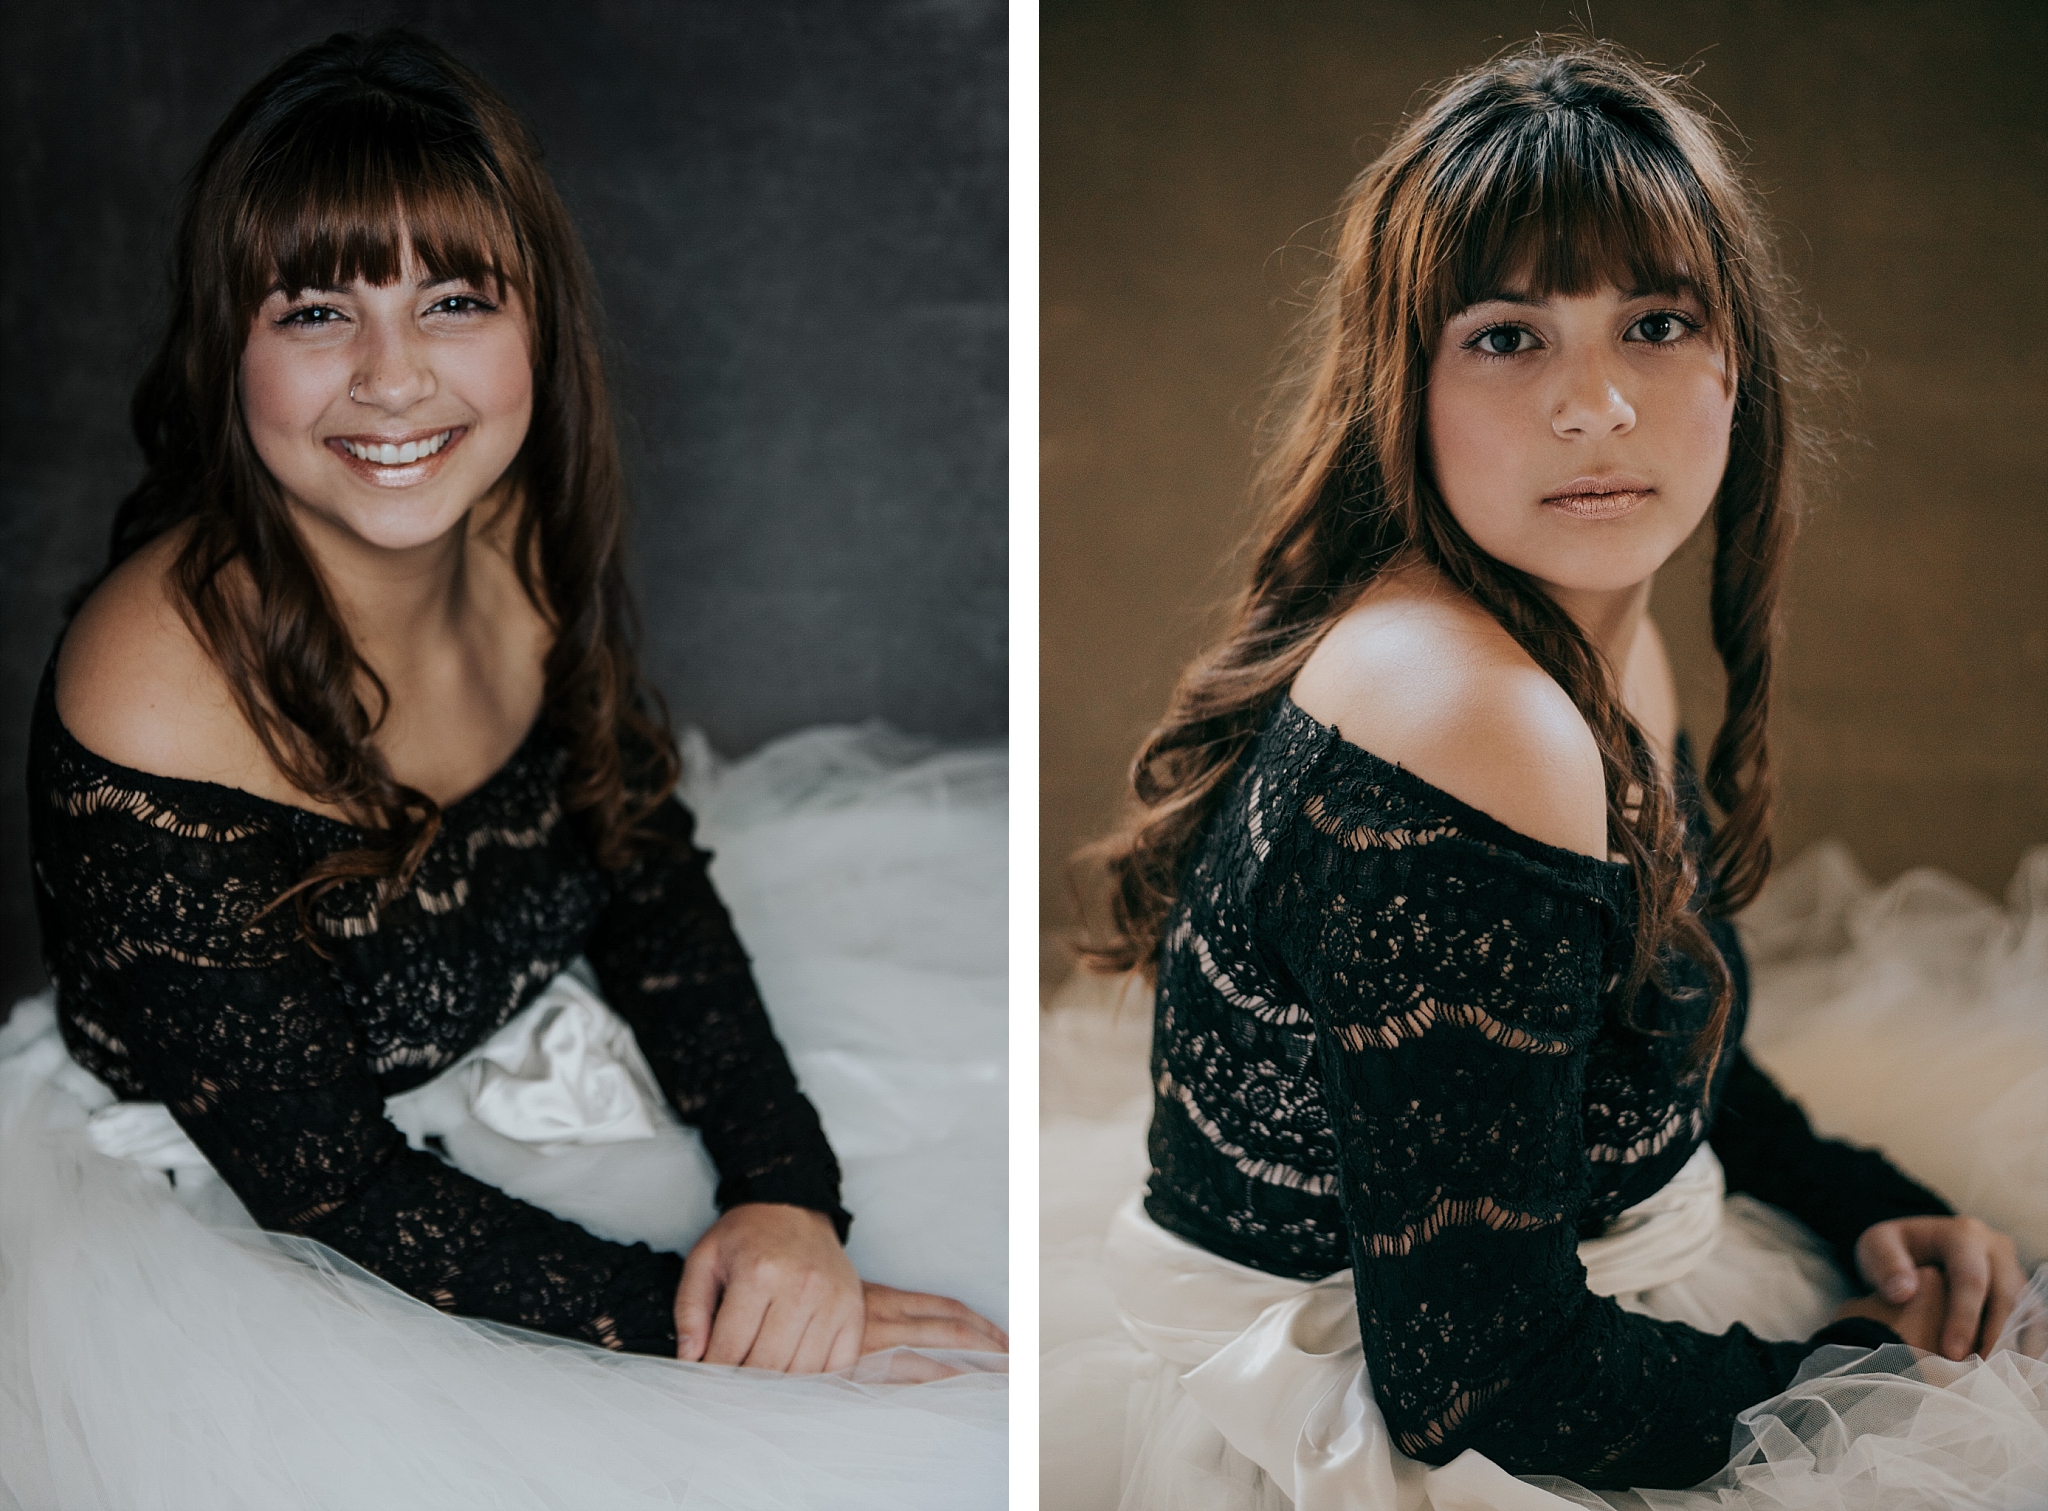 Sibling Portraits - Brother + Sister | Stephanie Acar, Photographer